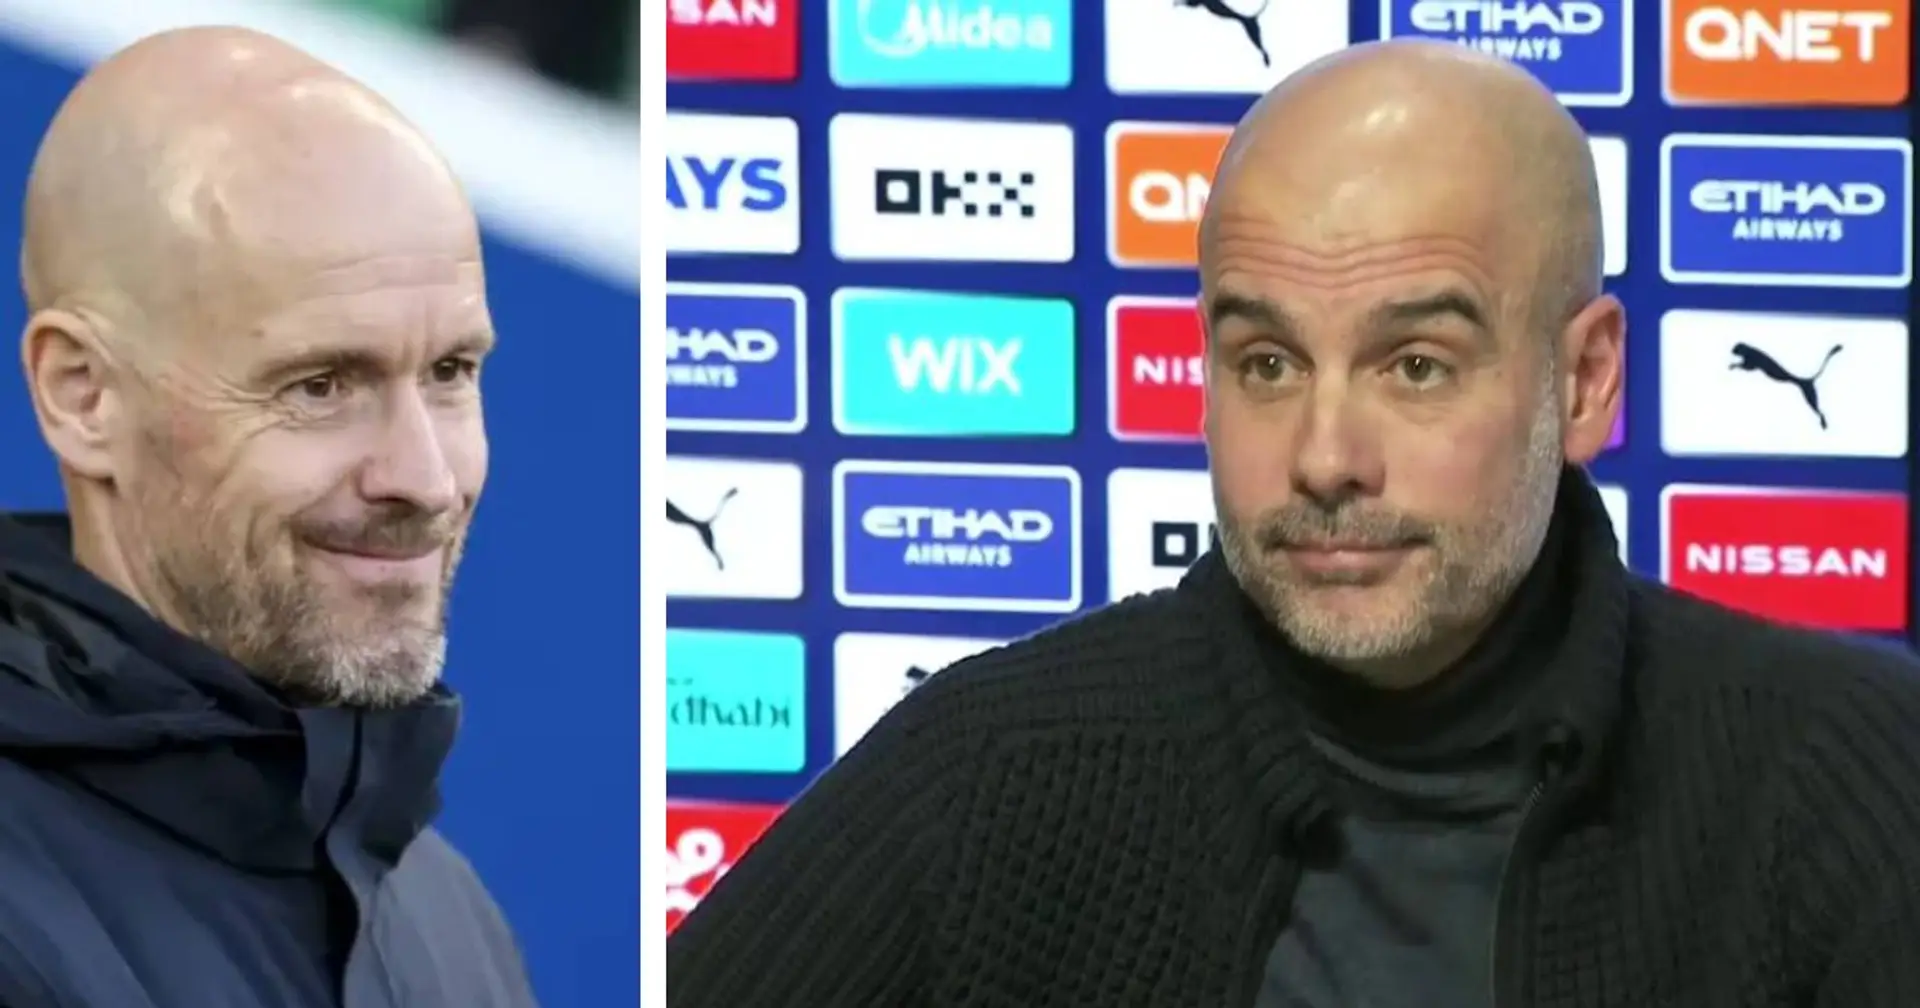 'I'm more focused on Man United right now': Pep Guardiola sends message to Ten Hag